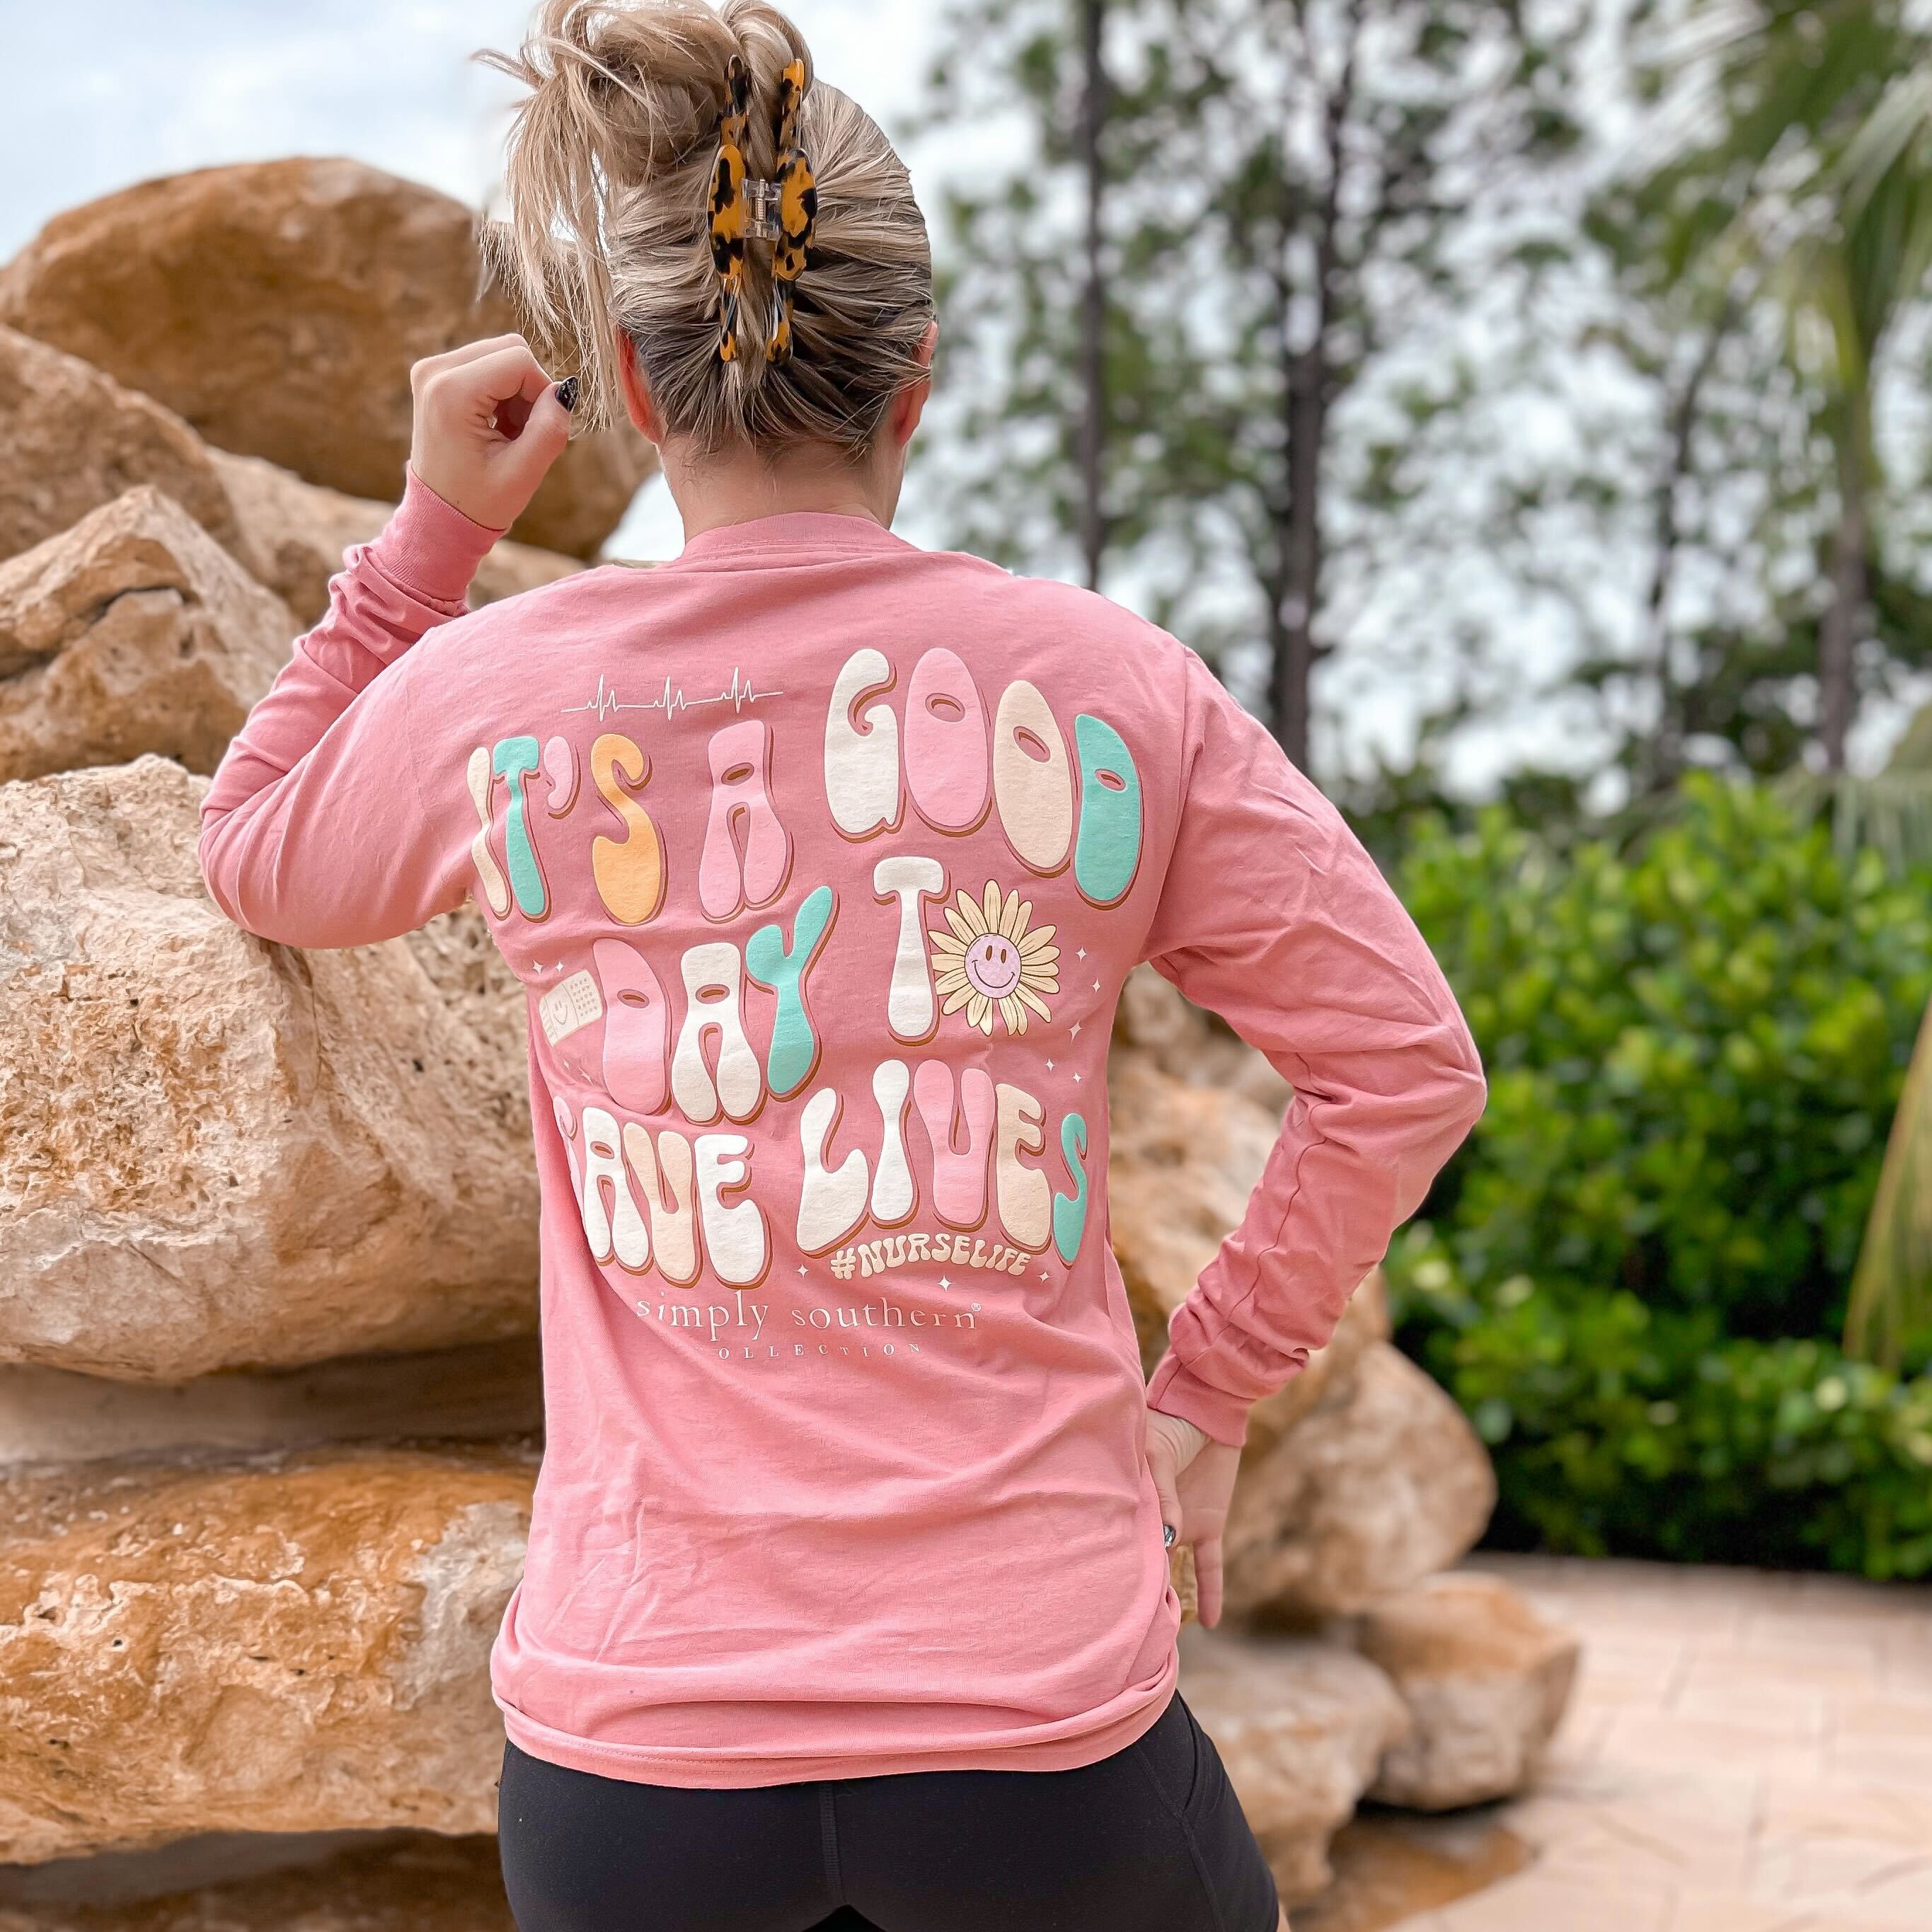 'Good Day To Save Lives' Long Sleeve Tee by Simply Southern